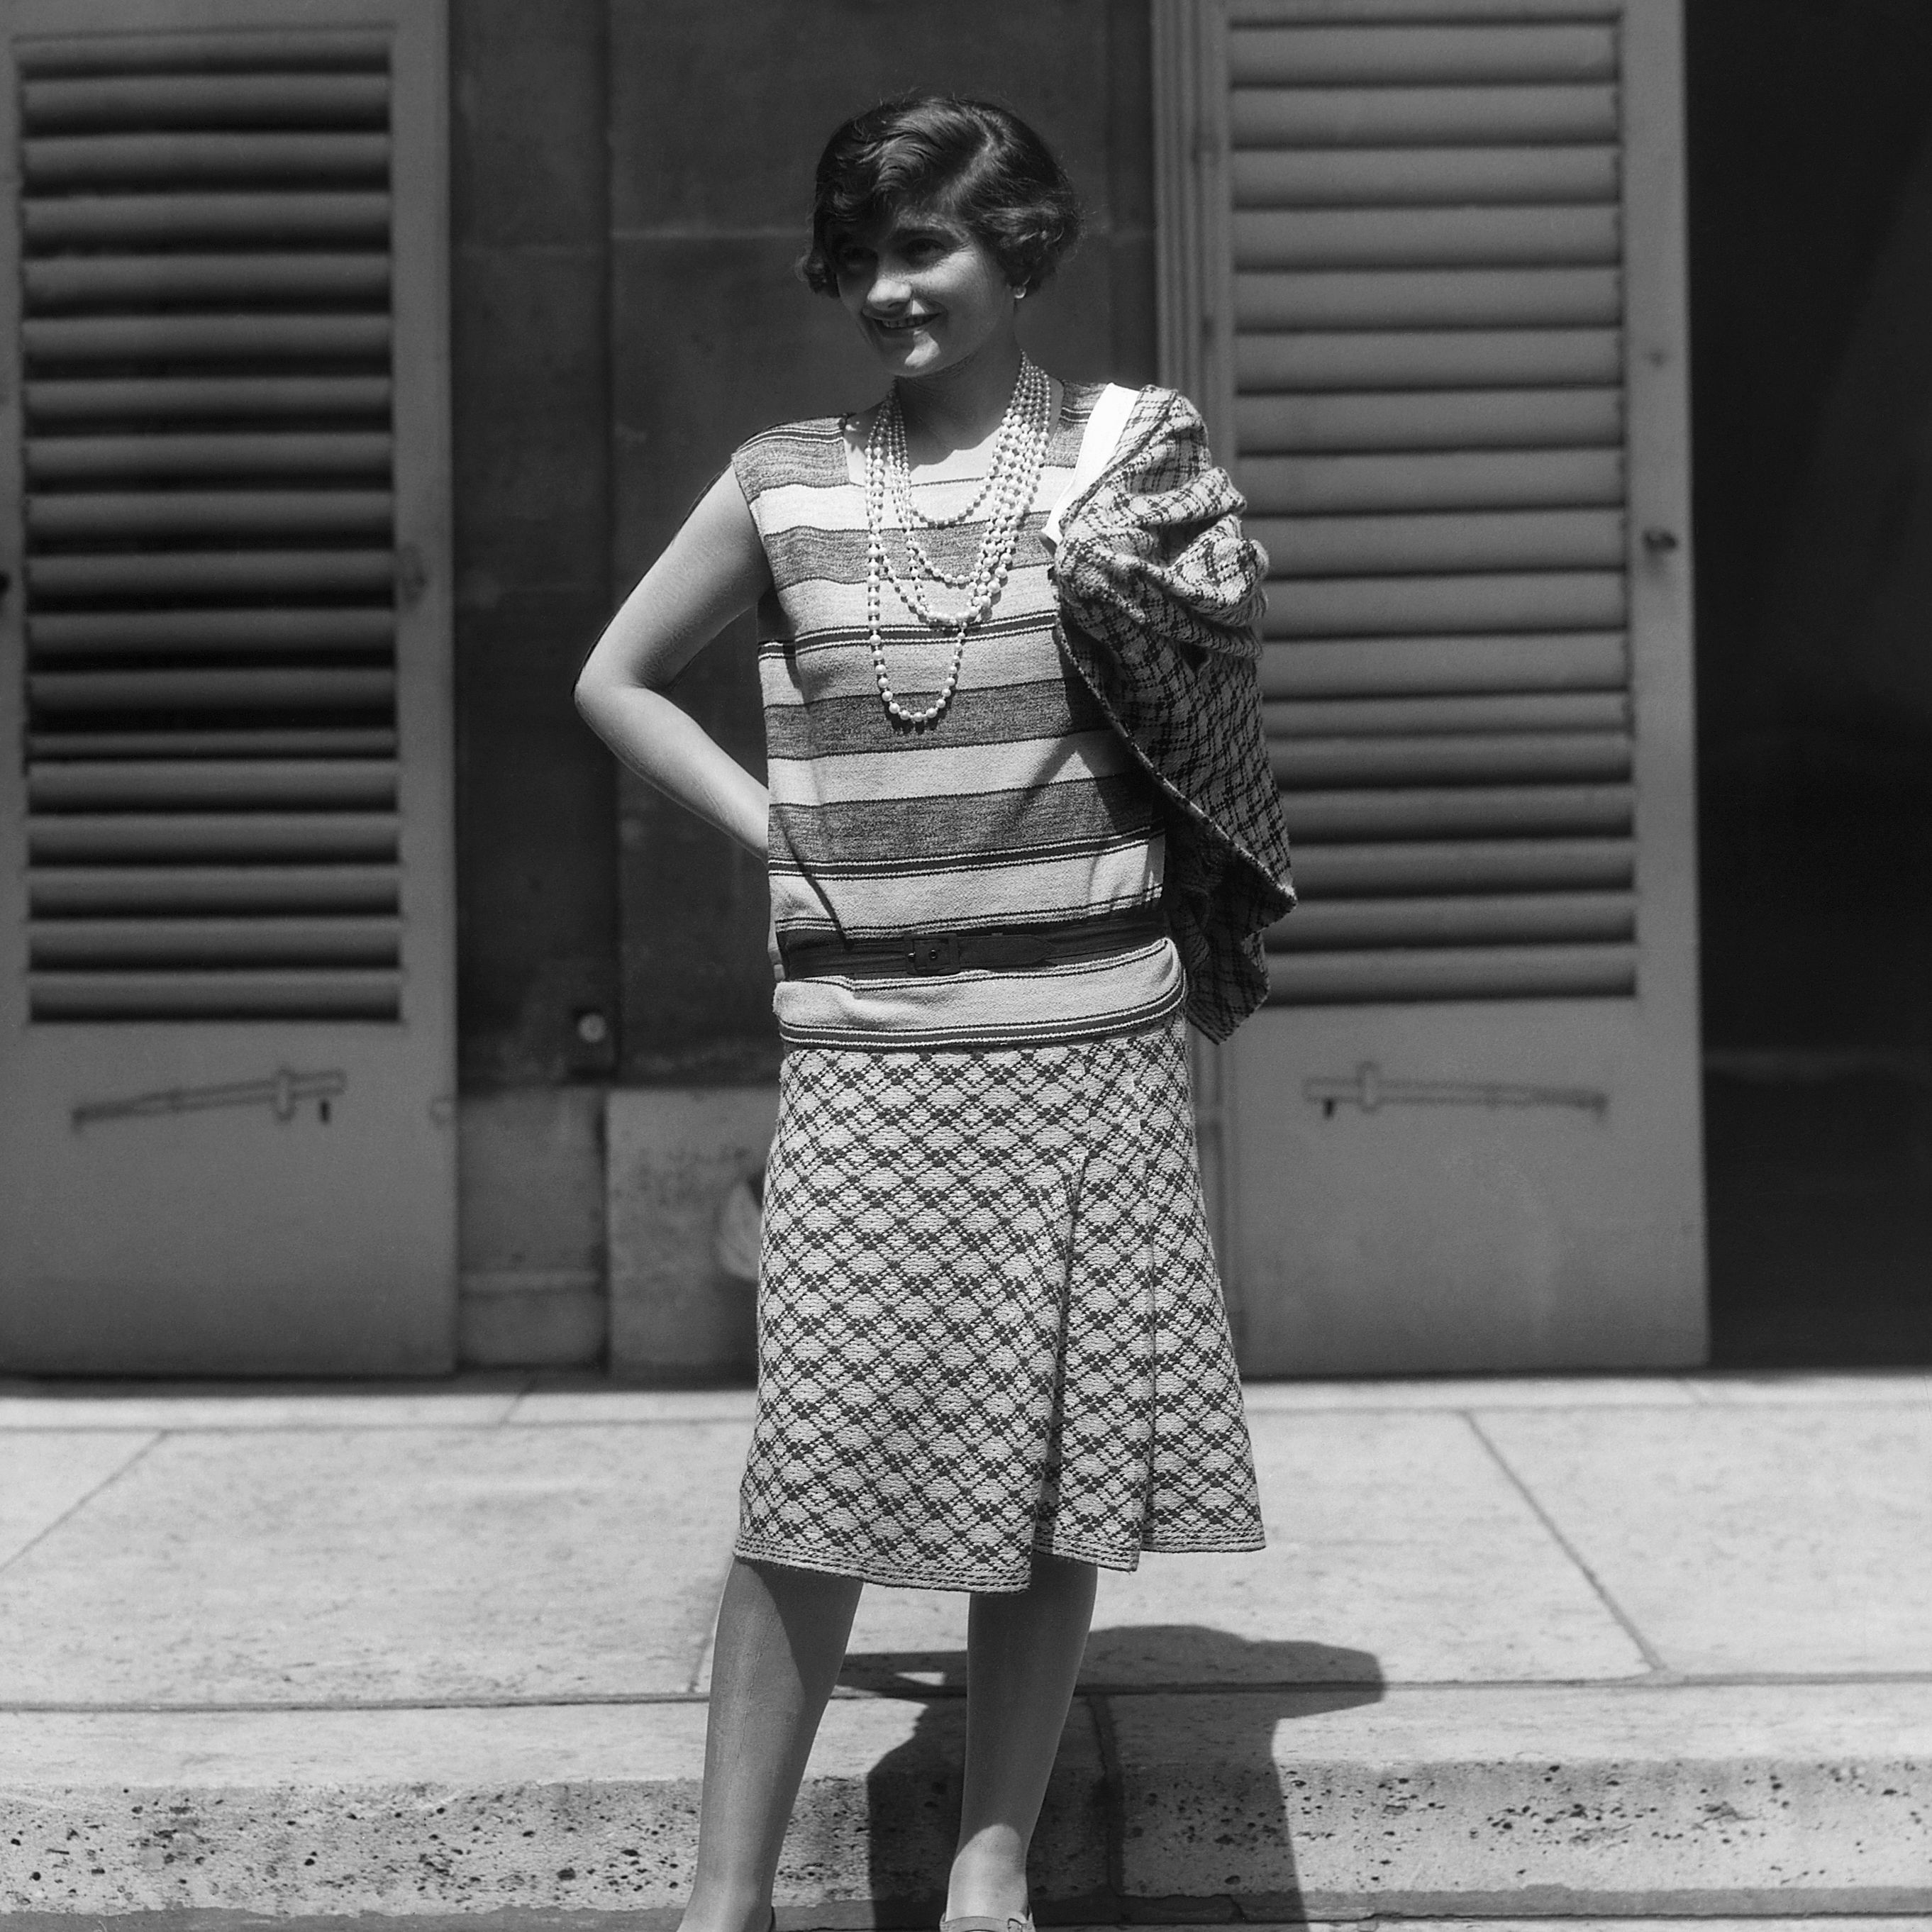 How Coco Chanel changed the course of fashion | CNN